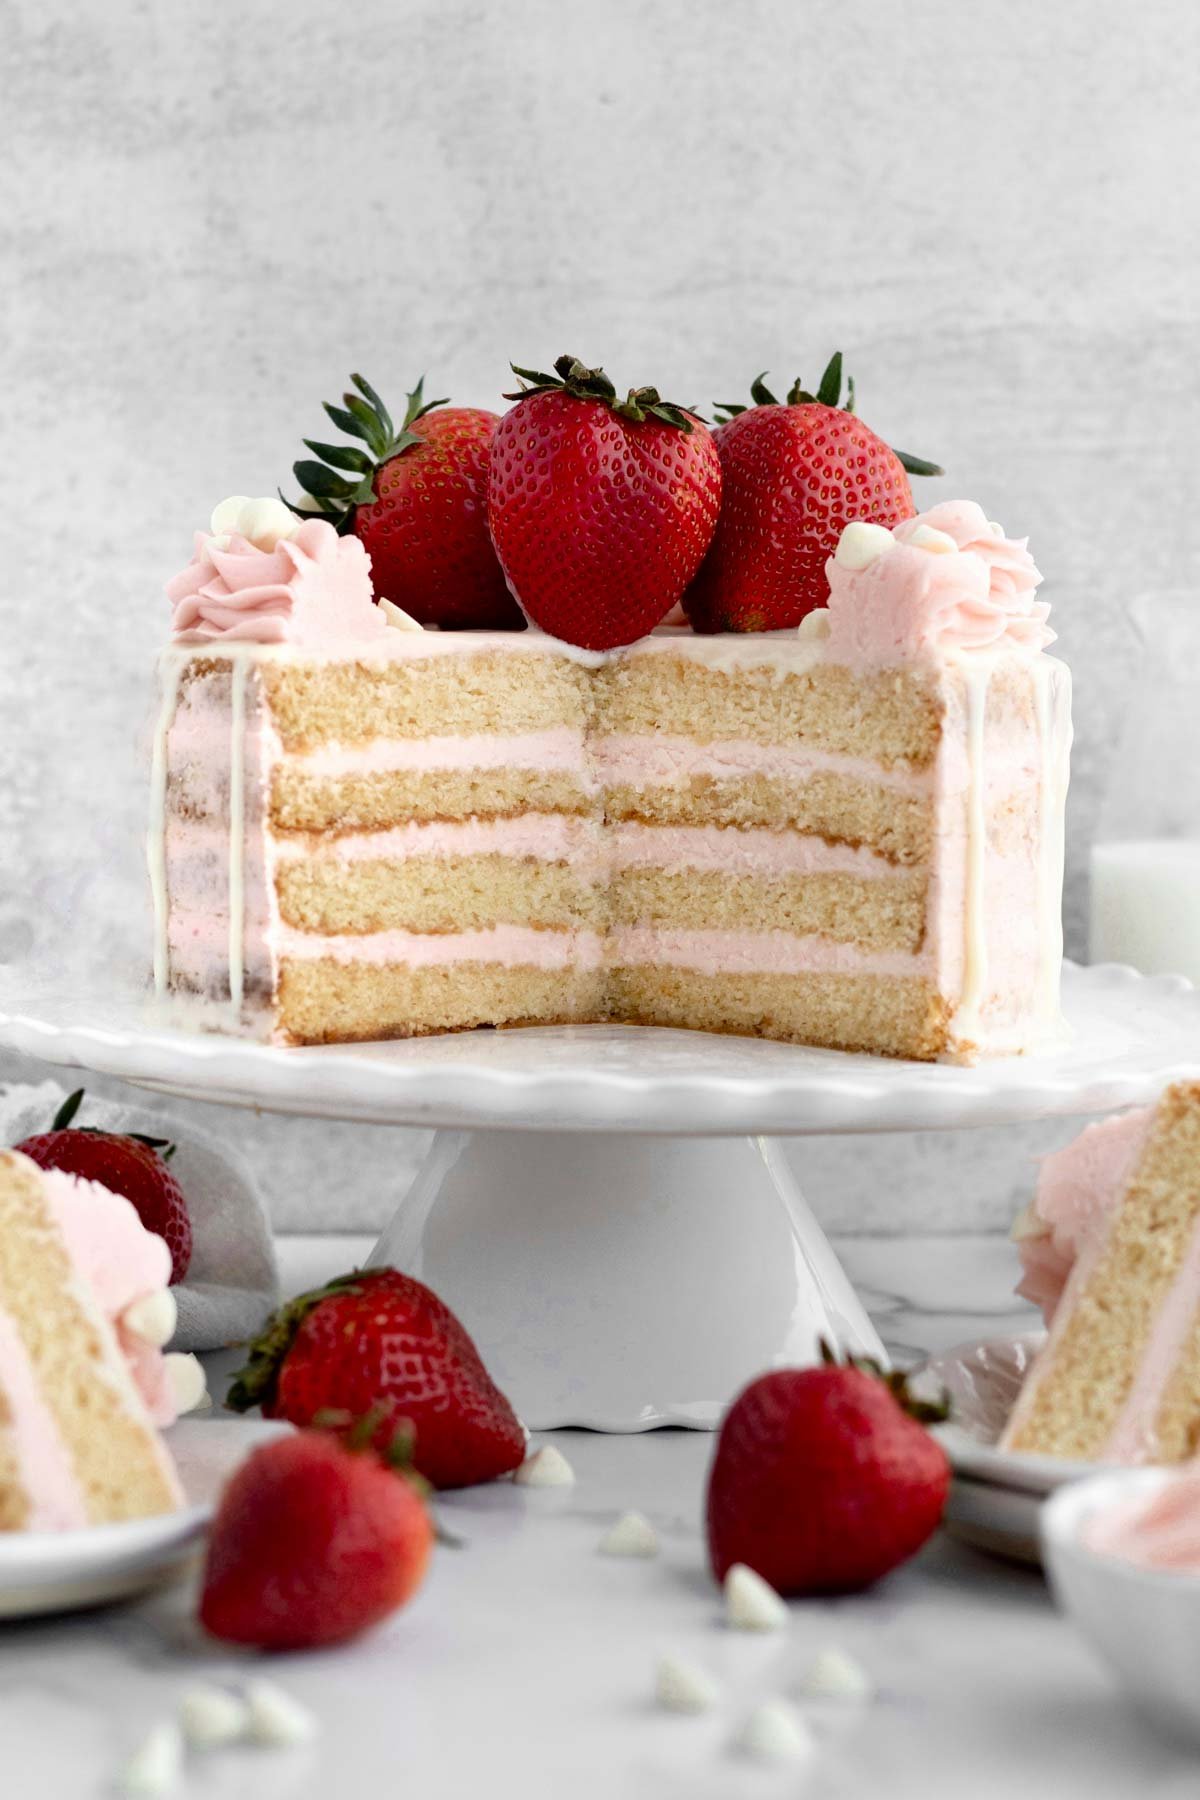 Vanilla Strawberry Cake cut open revealing the layers of frosting and cake.